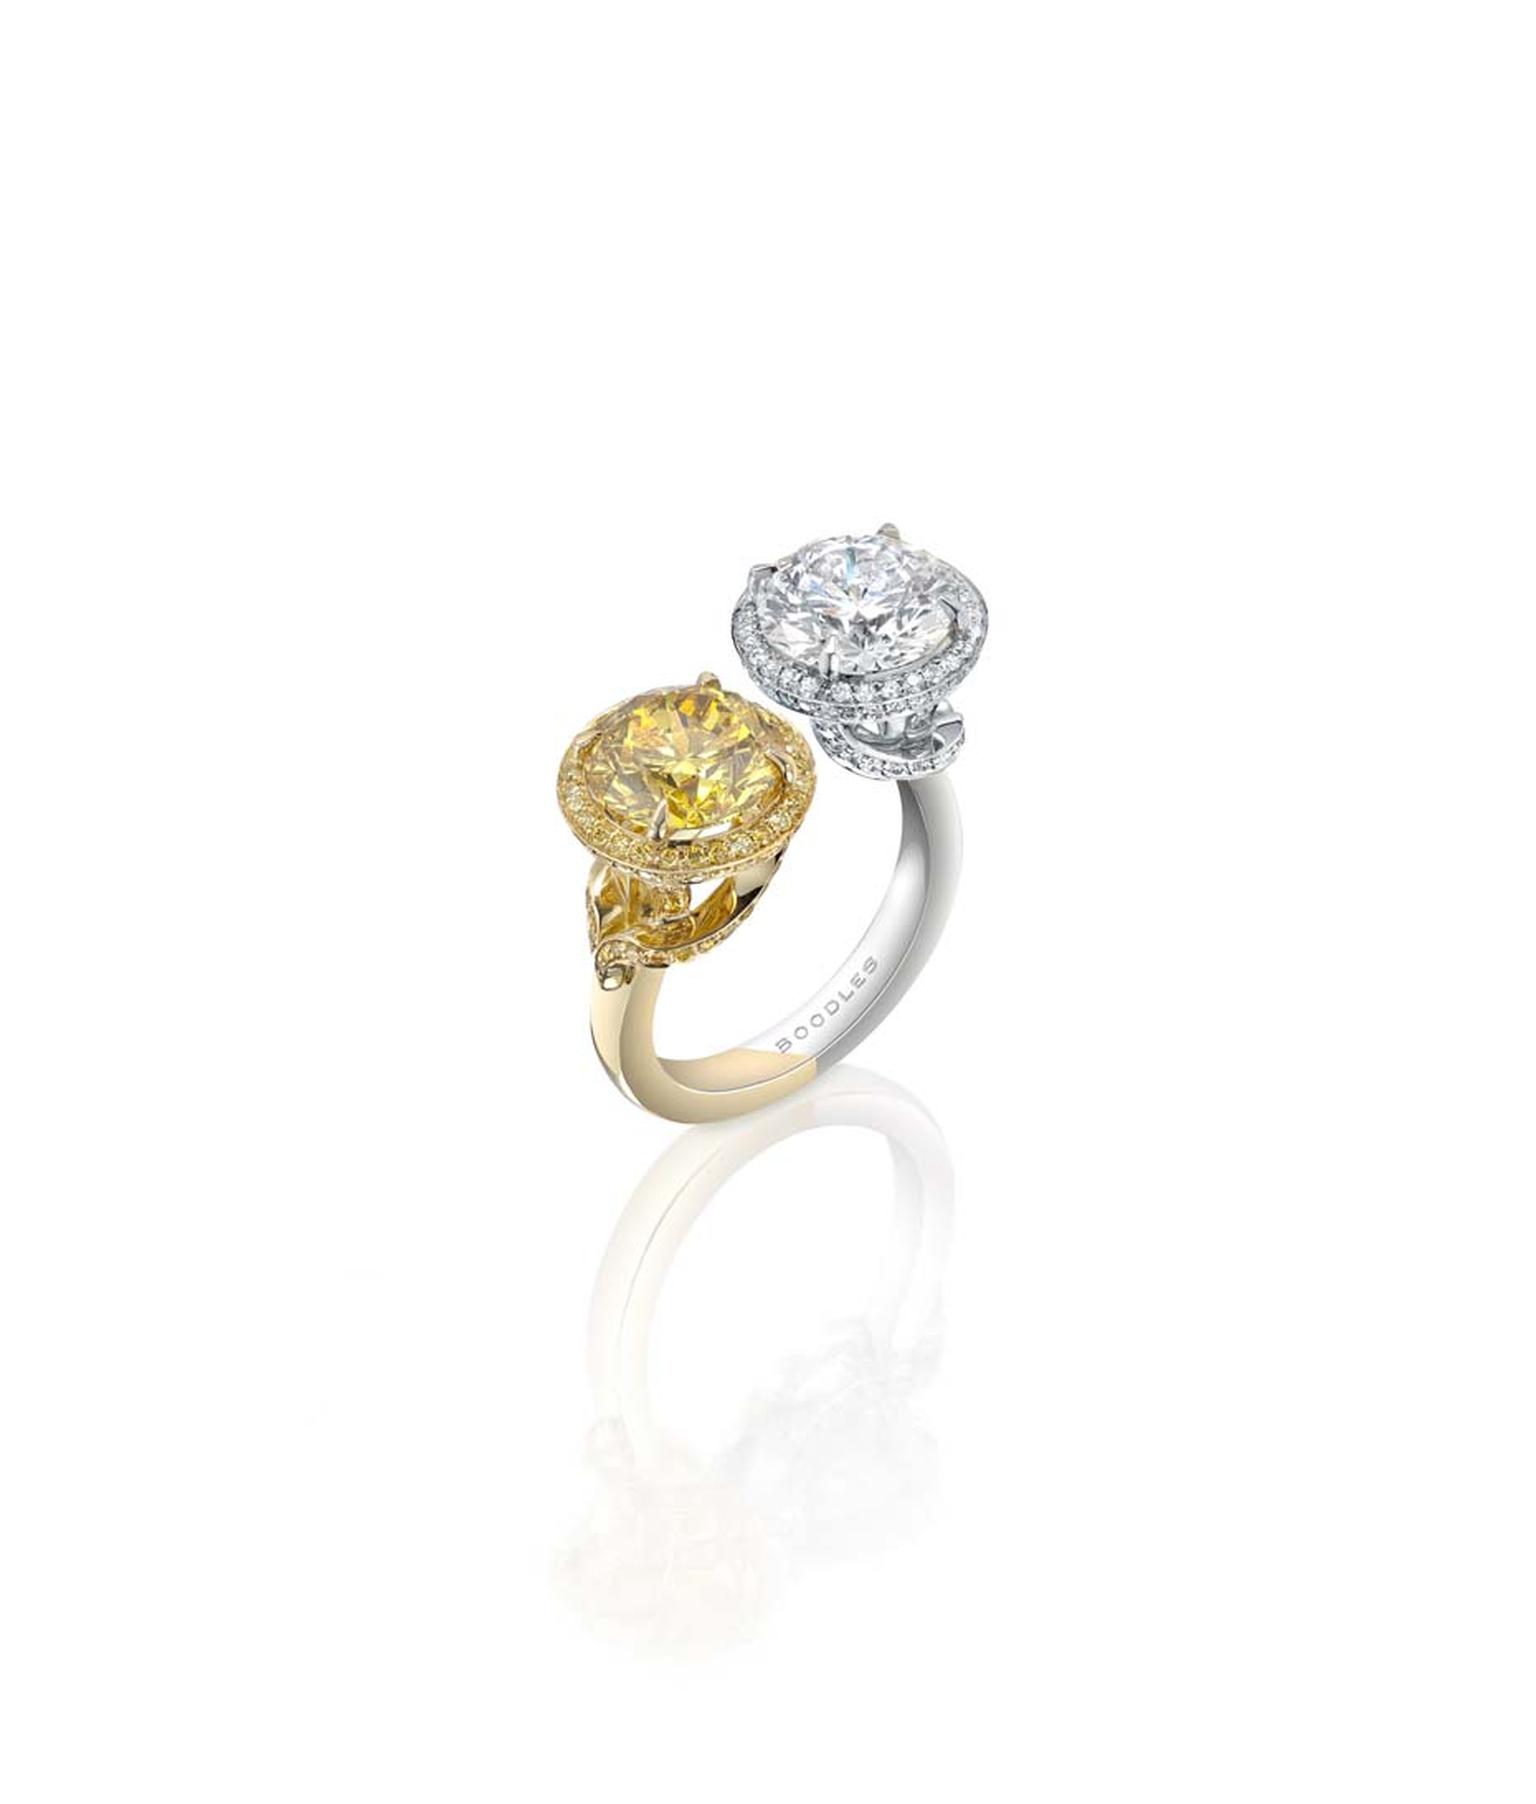 Boodles Gemini yellow and white gold ring set with a 3ct natural Fancy Vivid yellow diamond alongside a 3ct white diamond